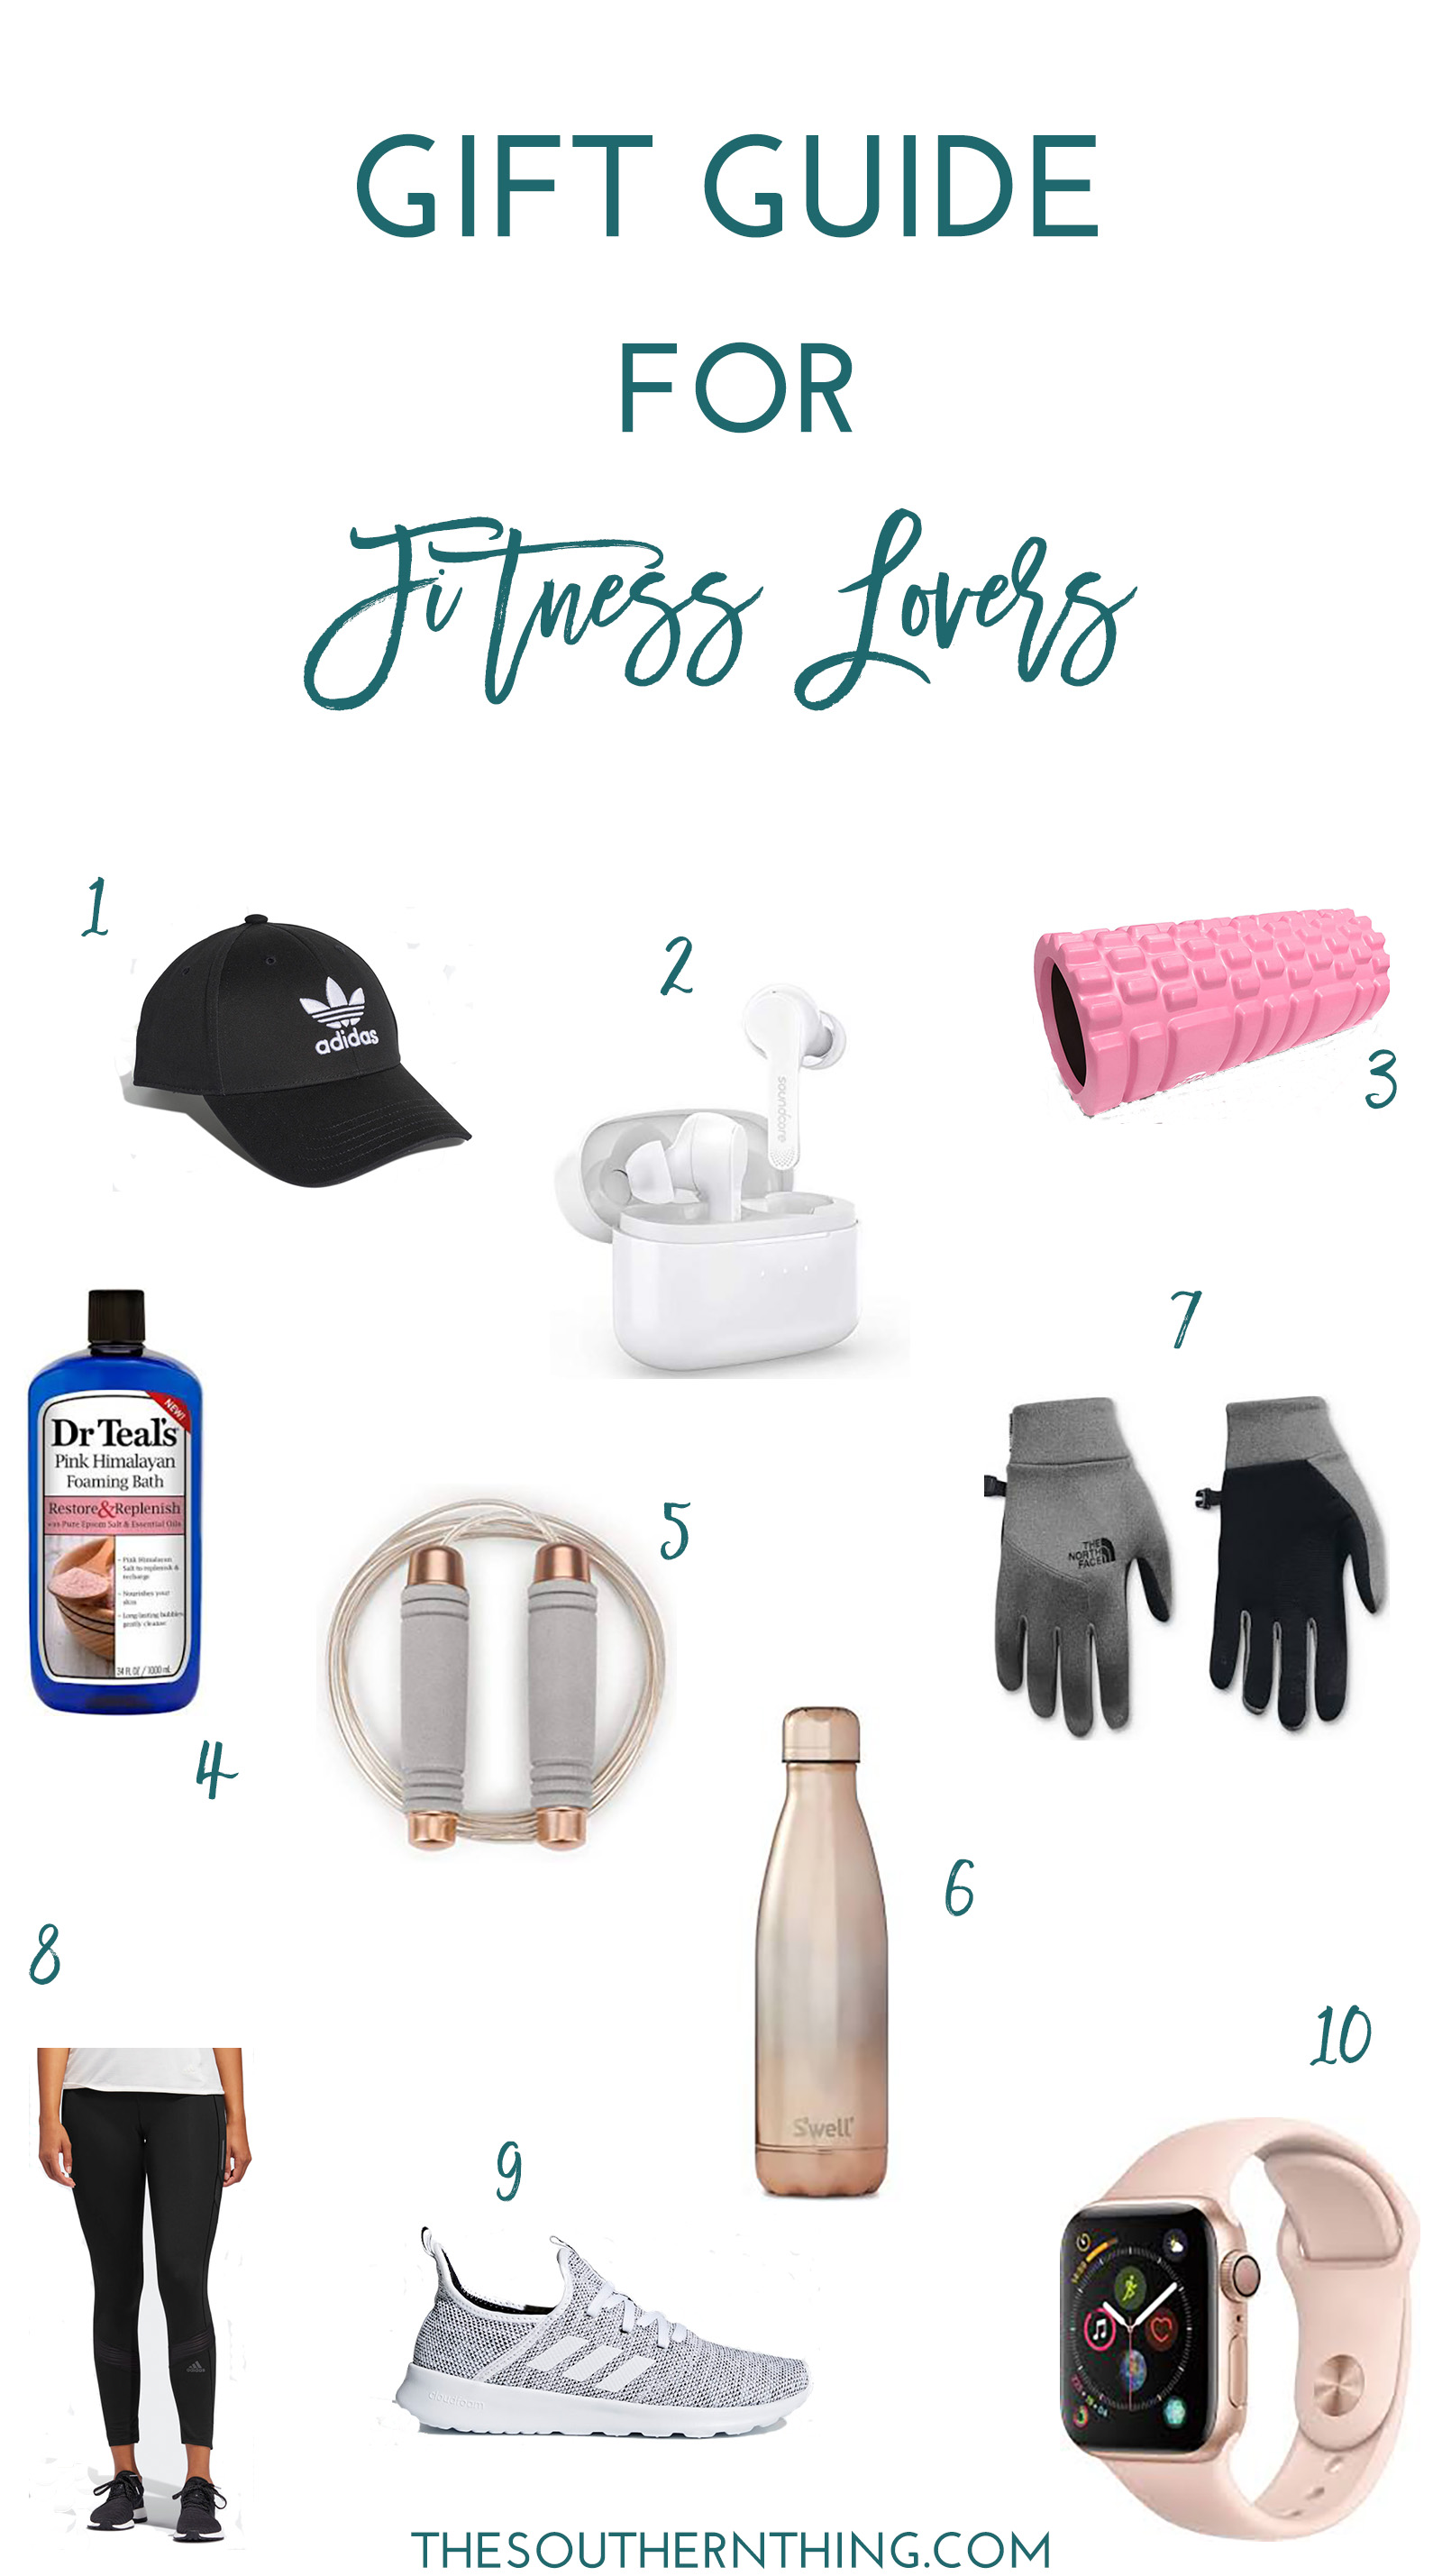 Gift Guide for Gym Lovers - Fine Fit Day